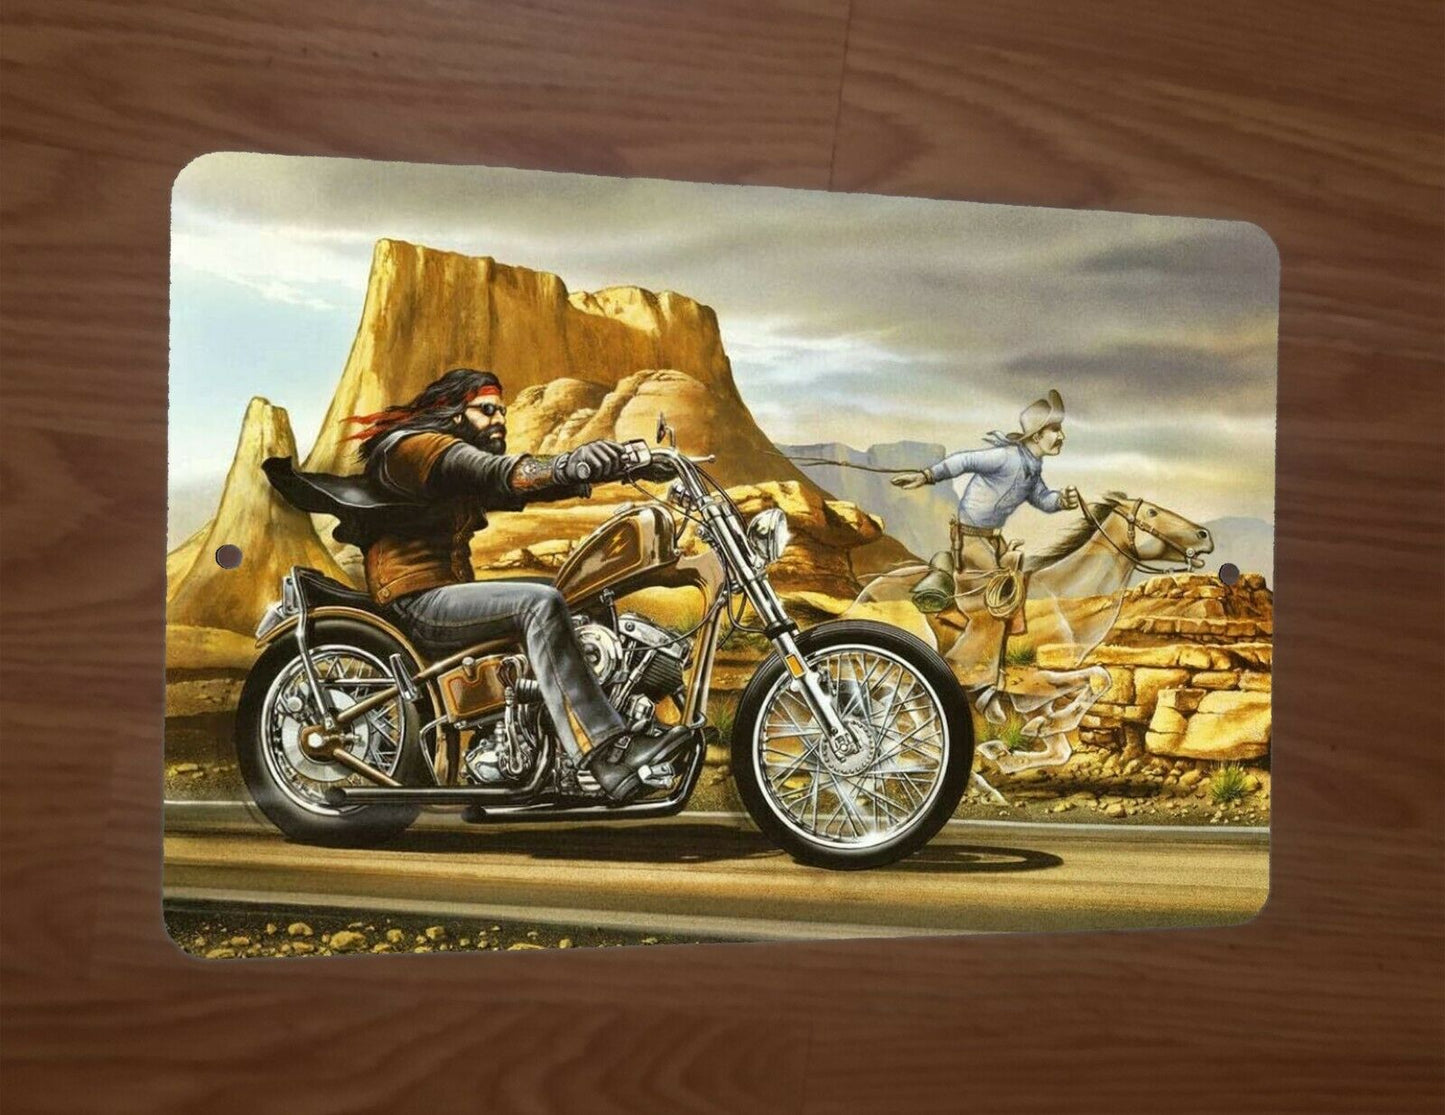 Motorcycle Easy Rider Photo 8x12 Metal Wall Sign Garage Poster